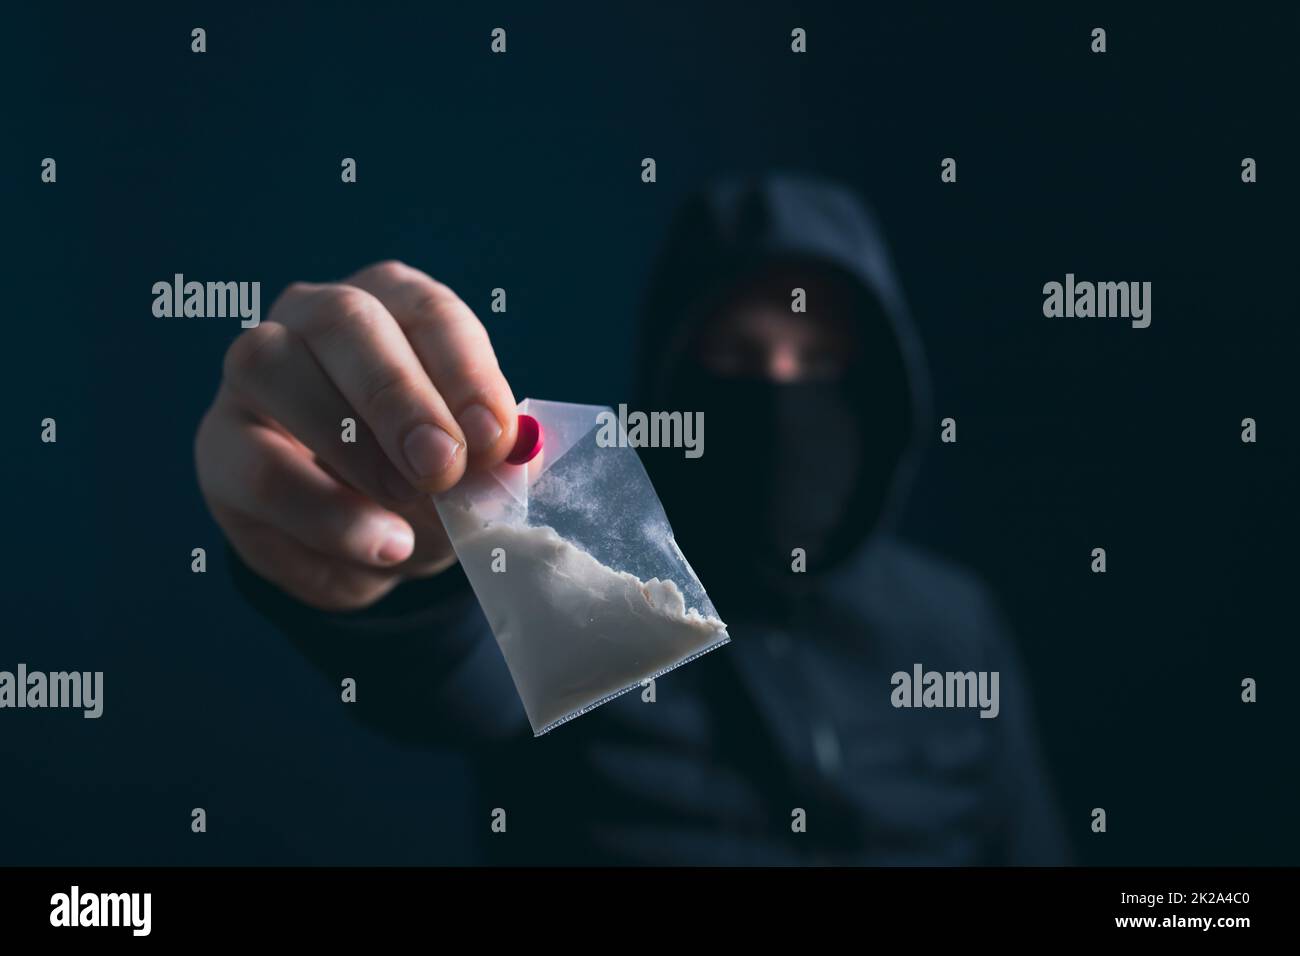 Male silhouette holding packet with drug. Trafficking crime, lifestyle. Stock Photo